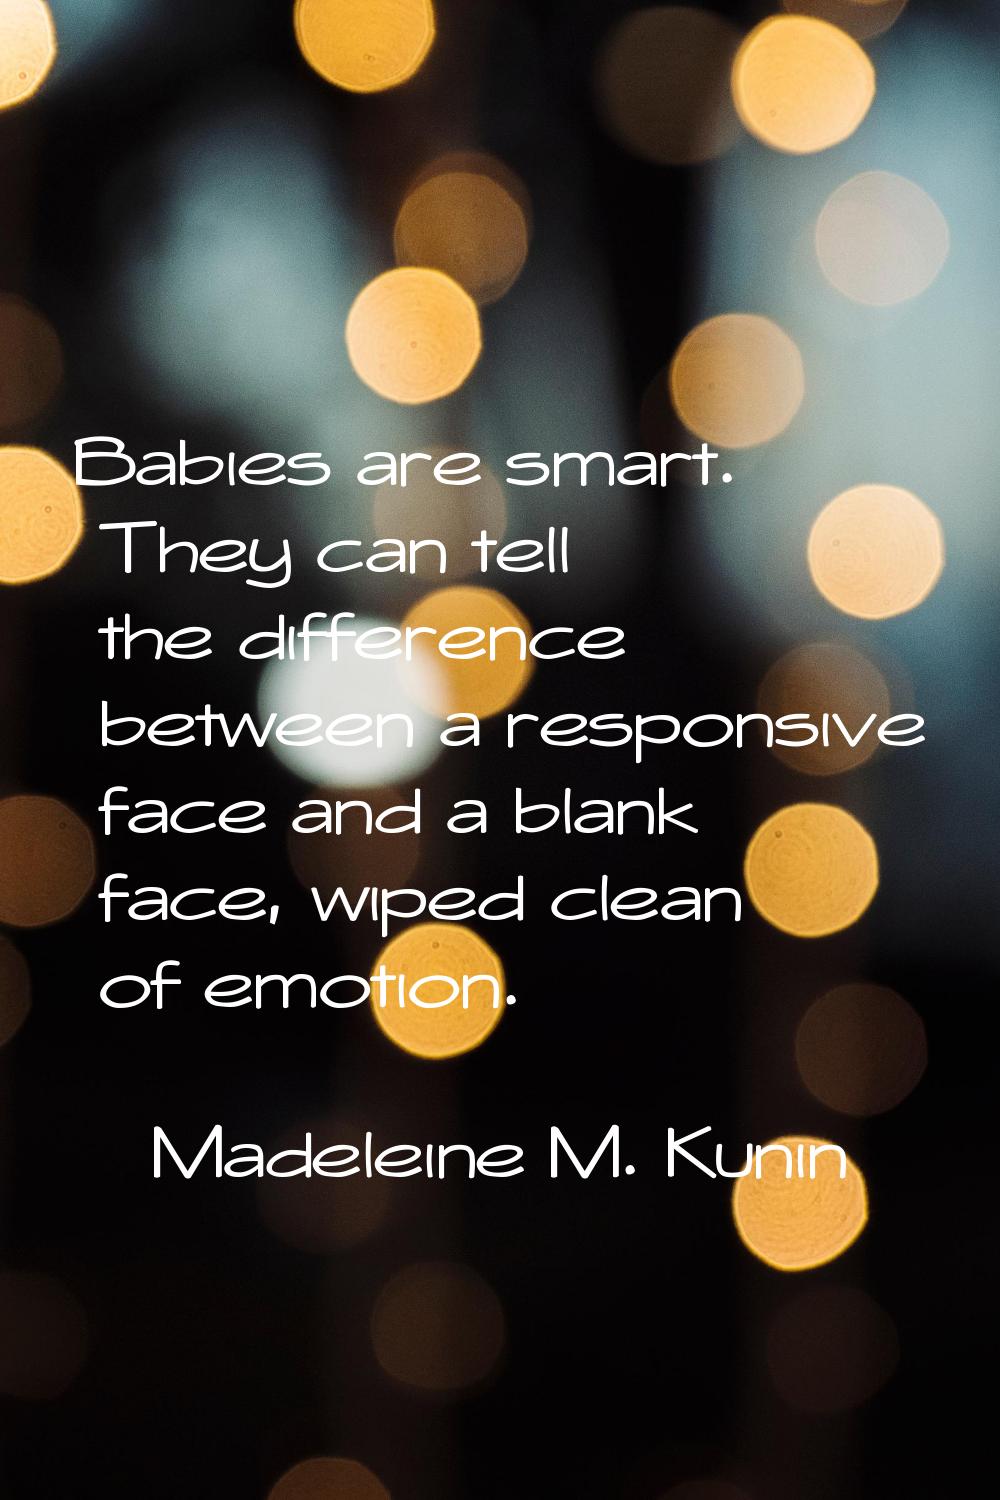 Babies are smart. They can tell the difference between a responsive face and a blank face, wiped cl